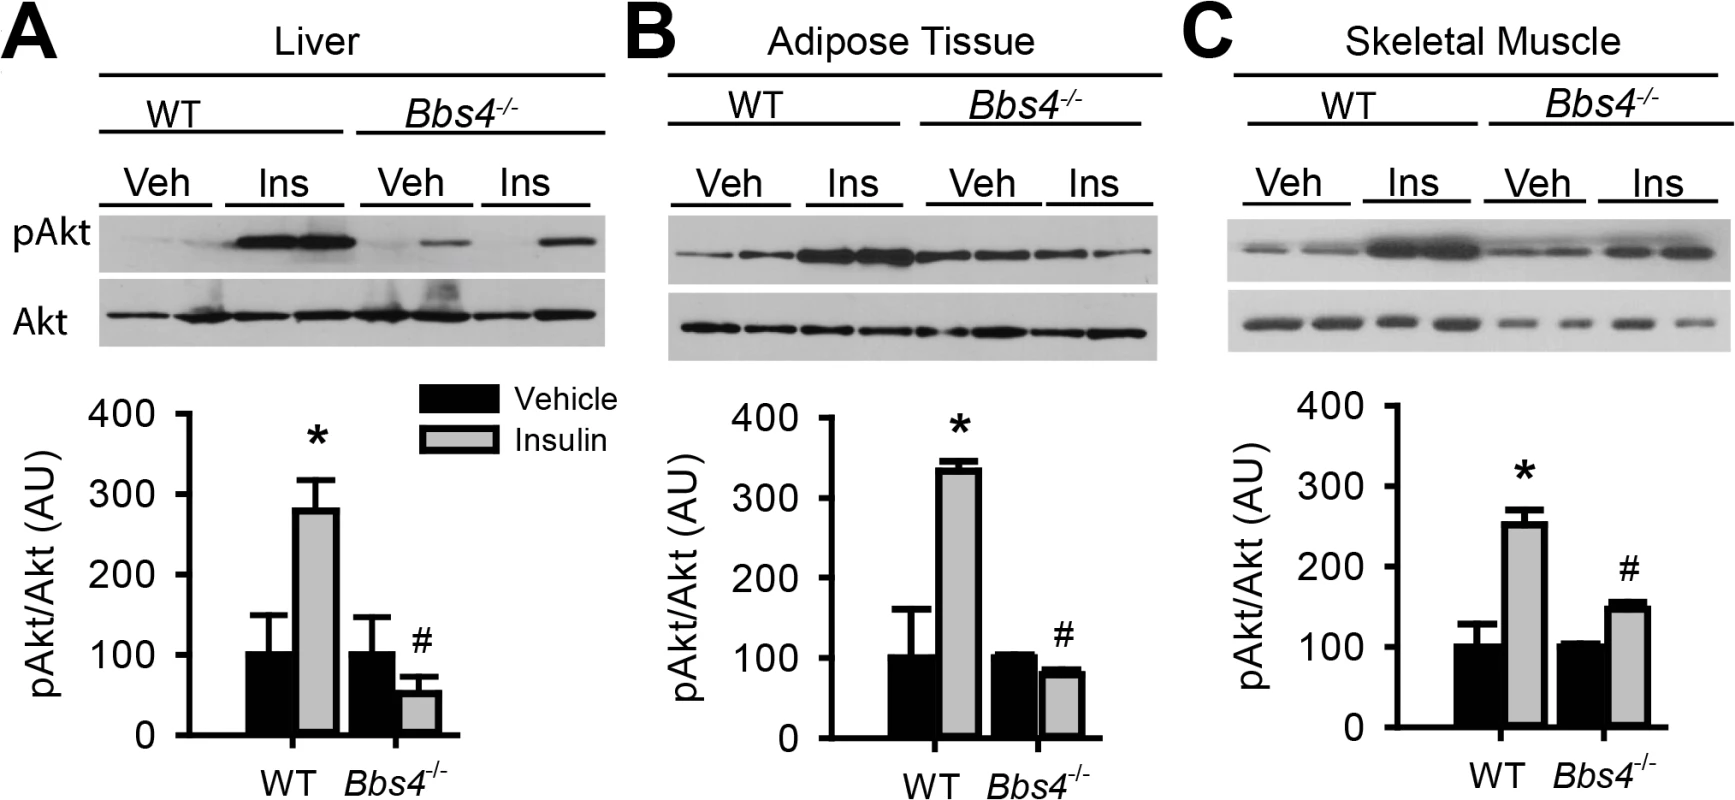 Obese Bbs4 null mice have reduced IR signaling (using phosphorylated Akt at S473 [pAkt] as readout), in liver (A), white adipose tissue (B) and skeletal muscle (C).